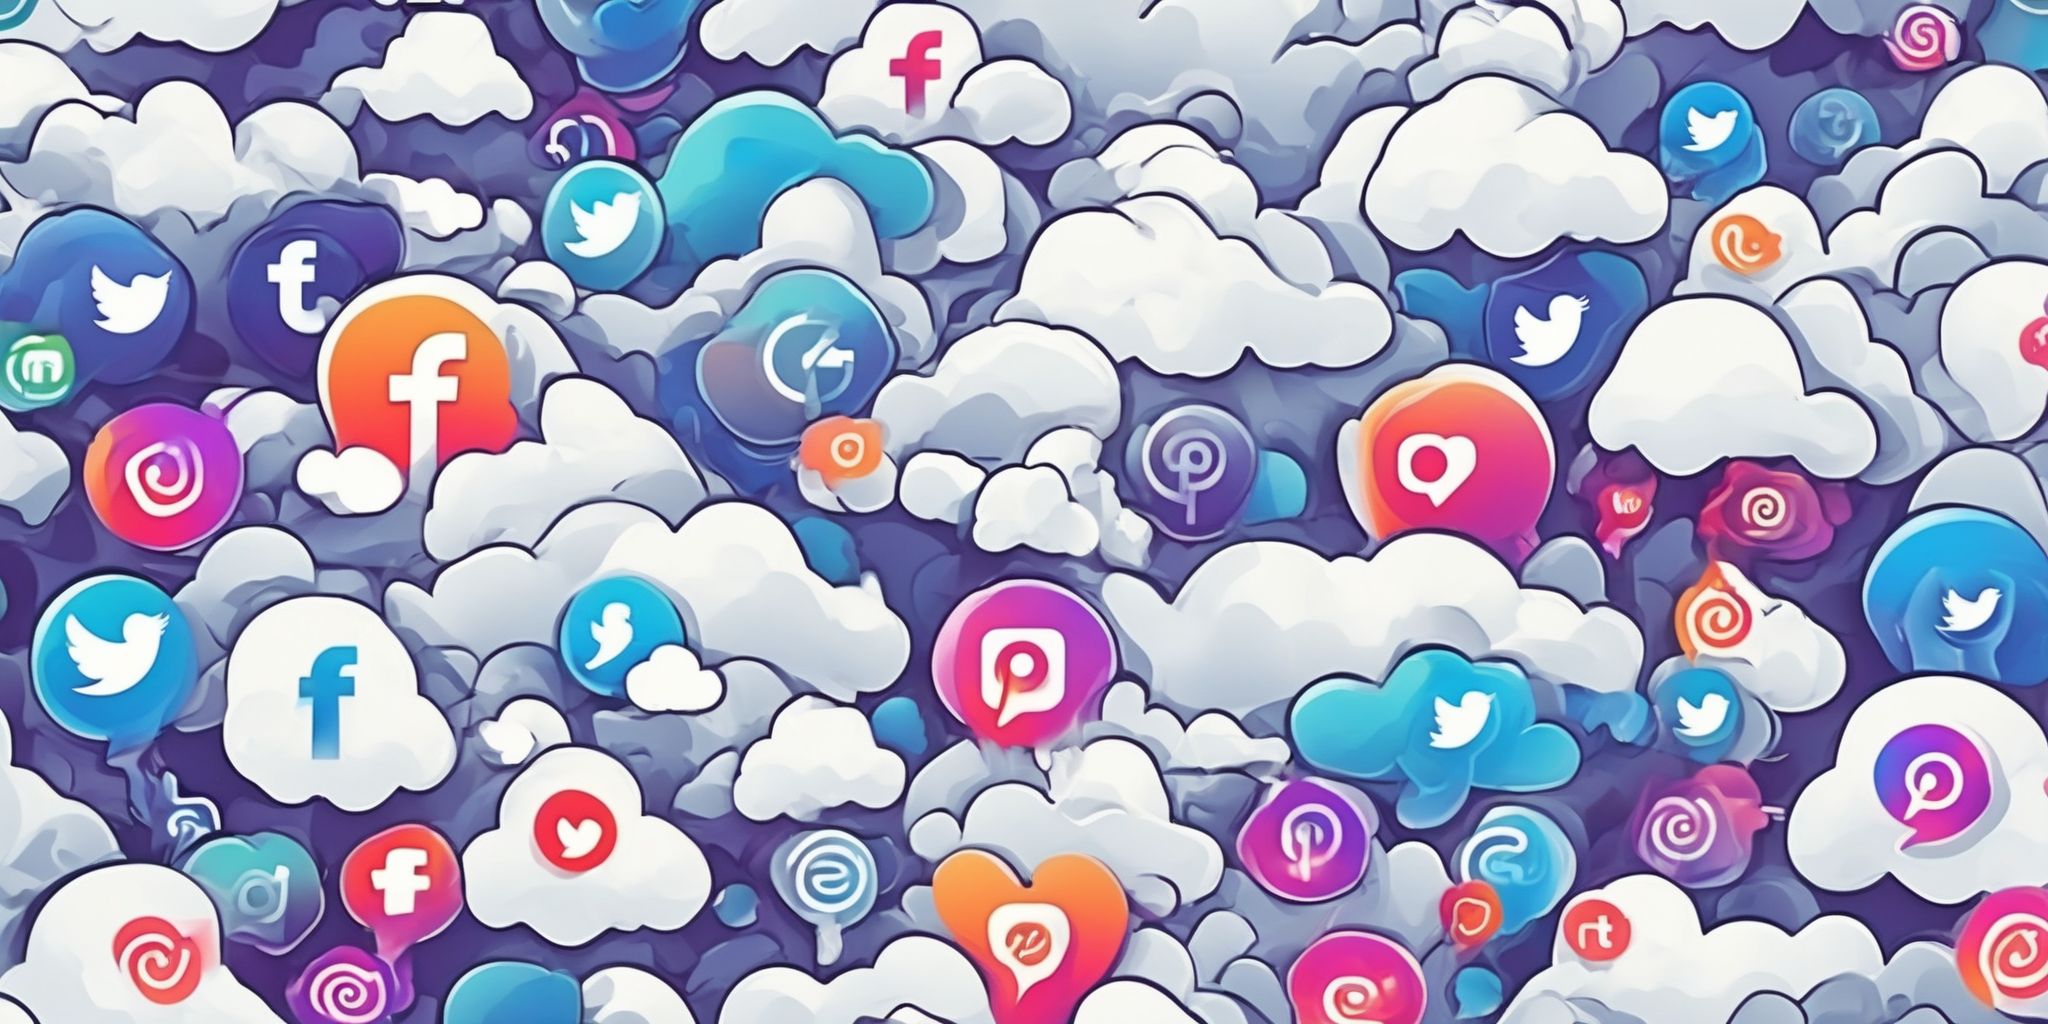 Social media storm in illustration style with gradients and white background